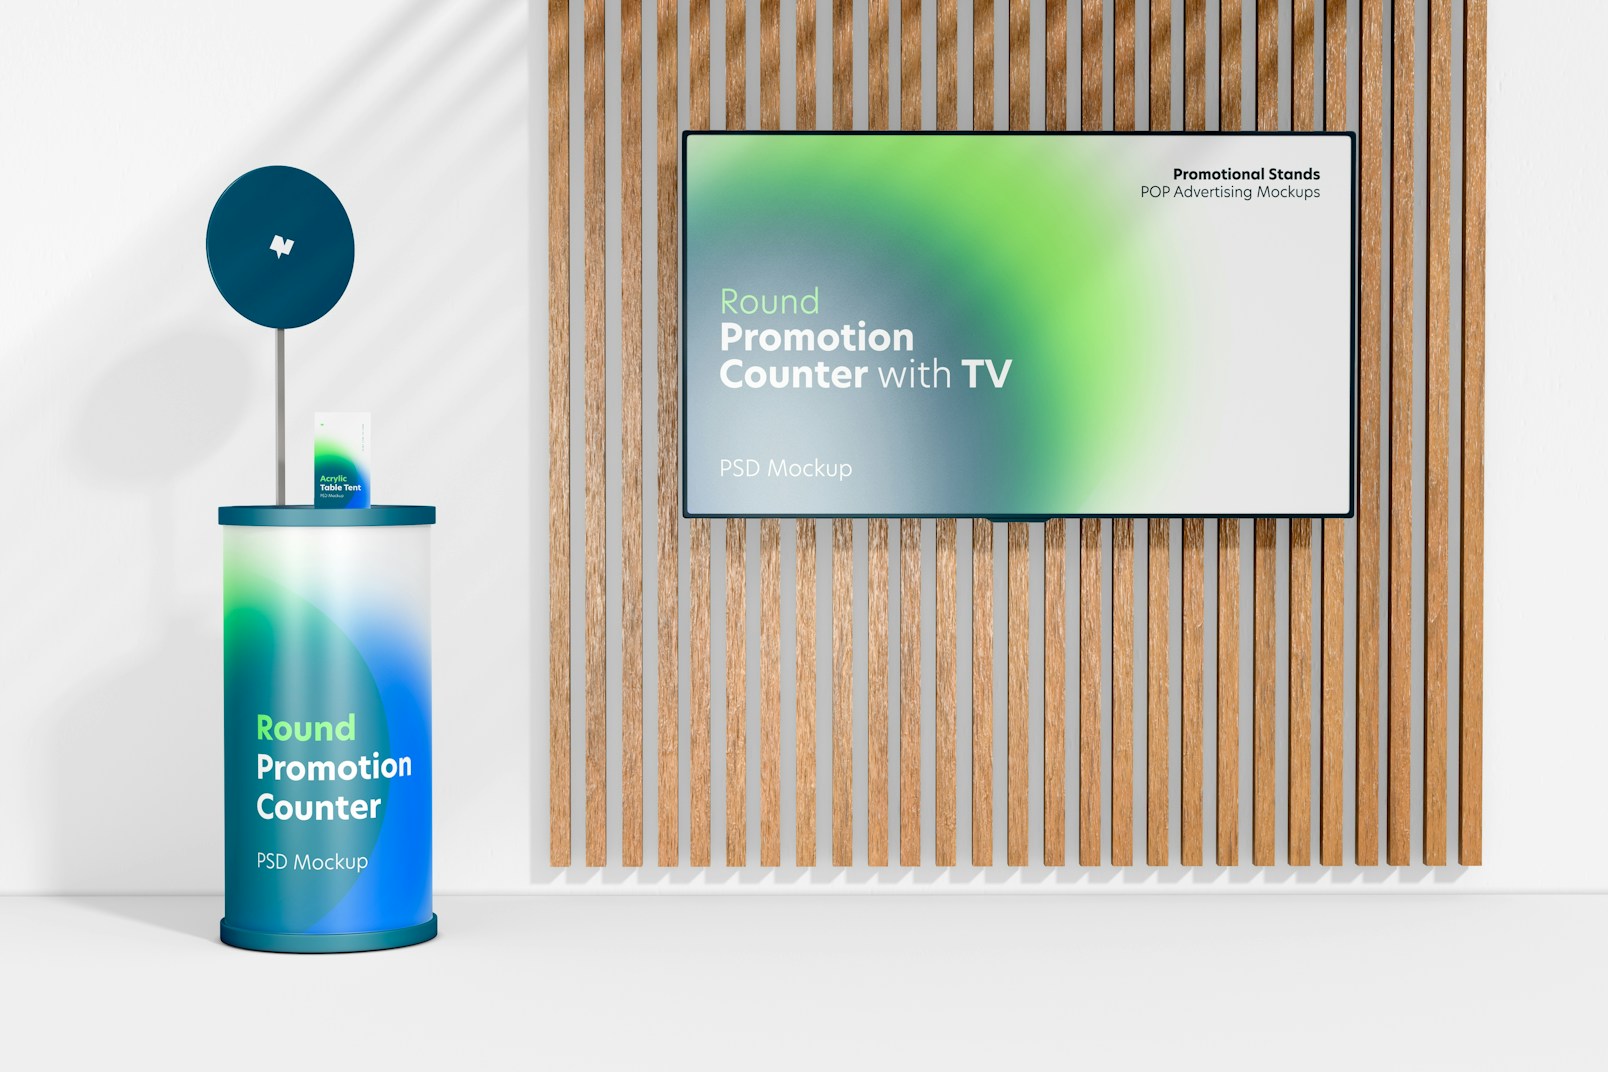 Round Promotion Counter with TV Mockup